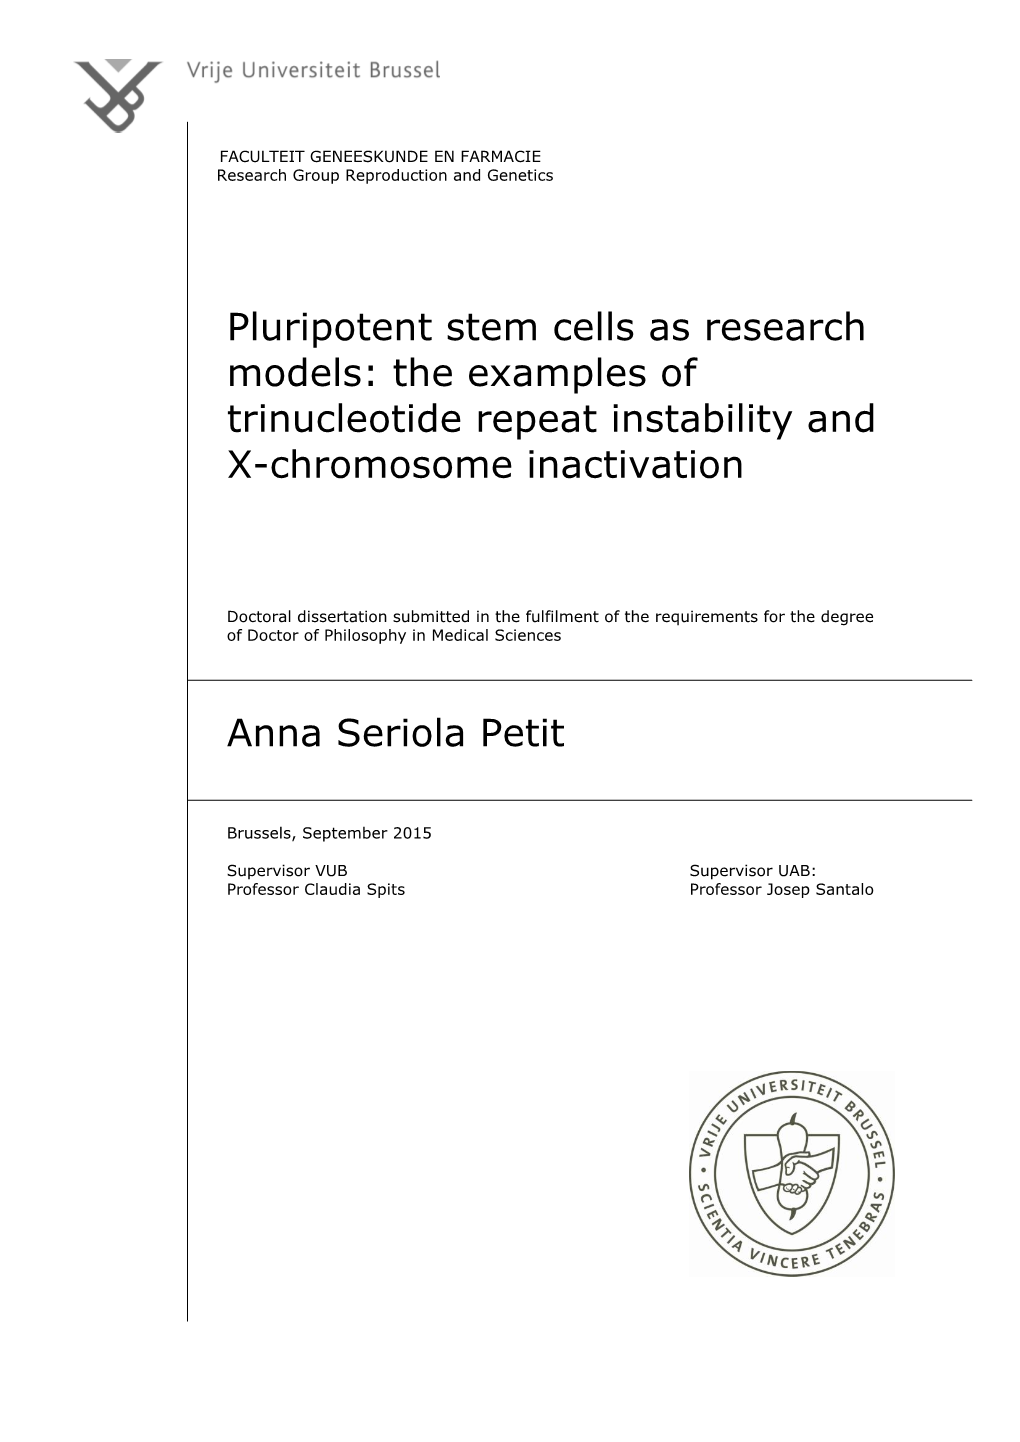 Pluripotent Stem Cells As Research Models: the Examples of Trinucleotide Repeat Instability and X-Chromosome Inactivation